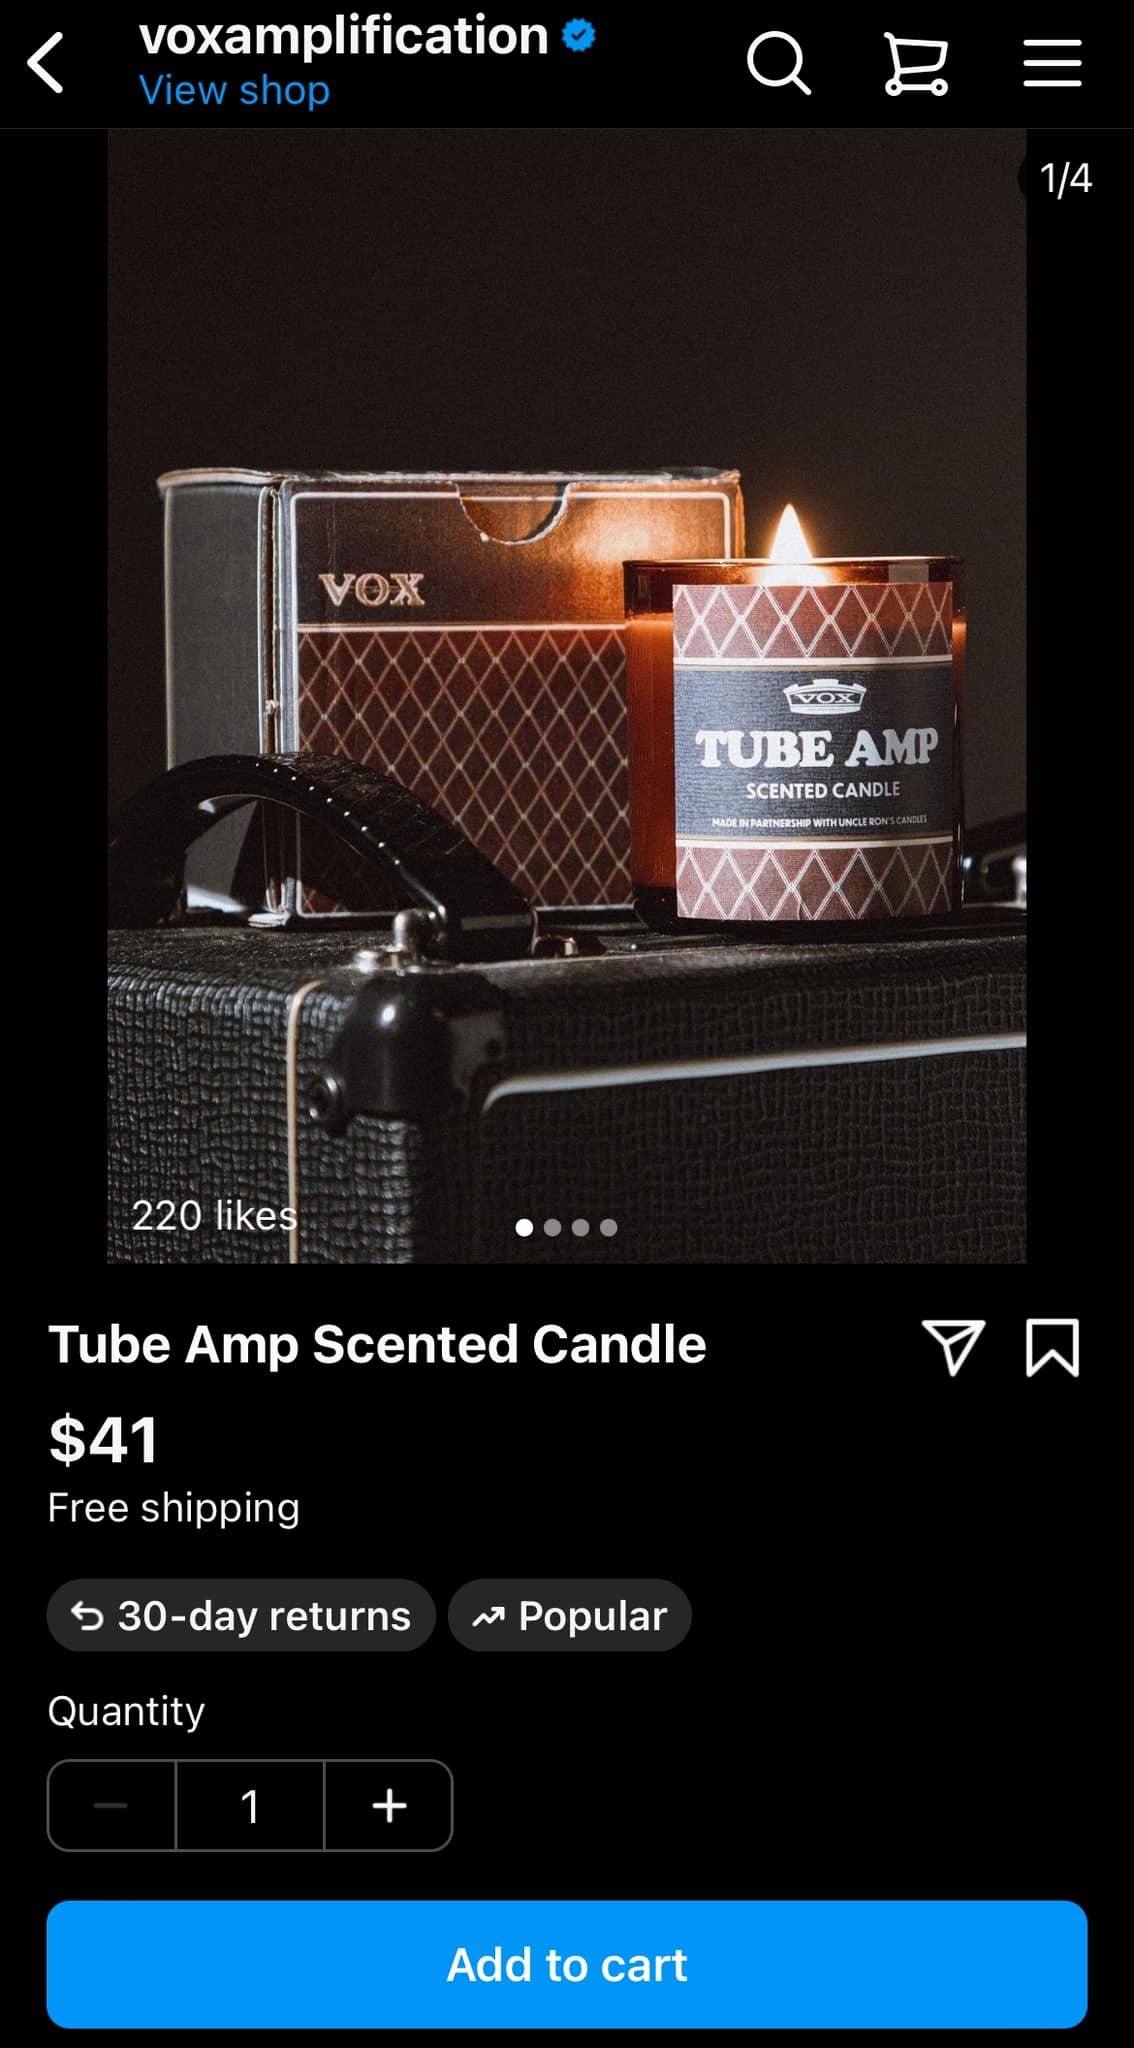 Um really???? Thoughts?💭 

Do we really need this ???

Does it really smell like a screaming hot tube amp?

Could this even be healthy? 

And last question&hellip;.. how&rsquo;s the tone???